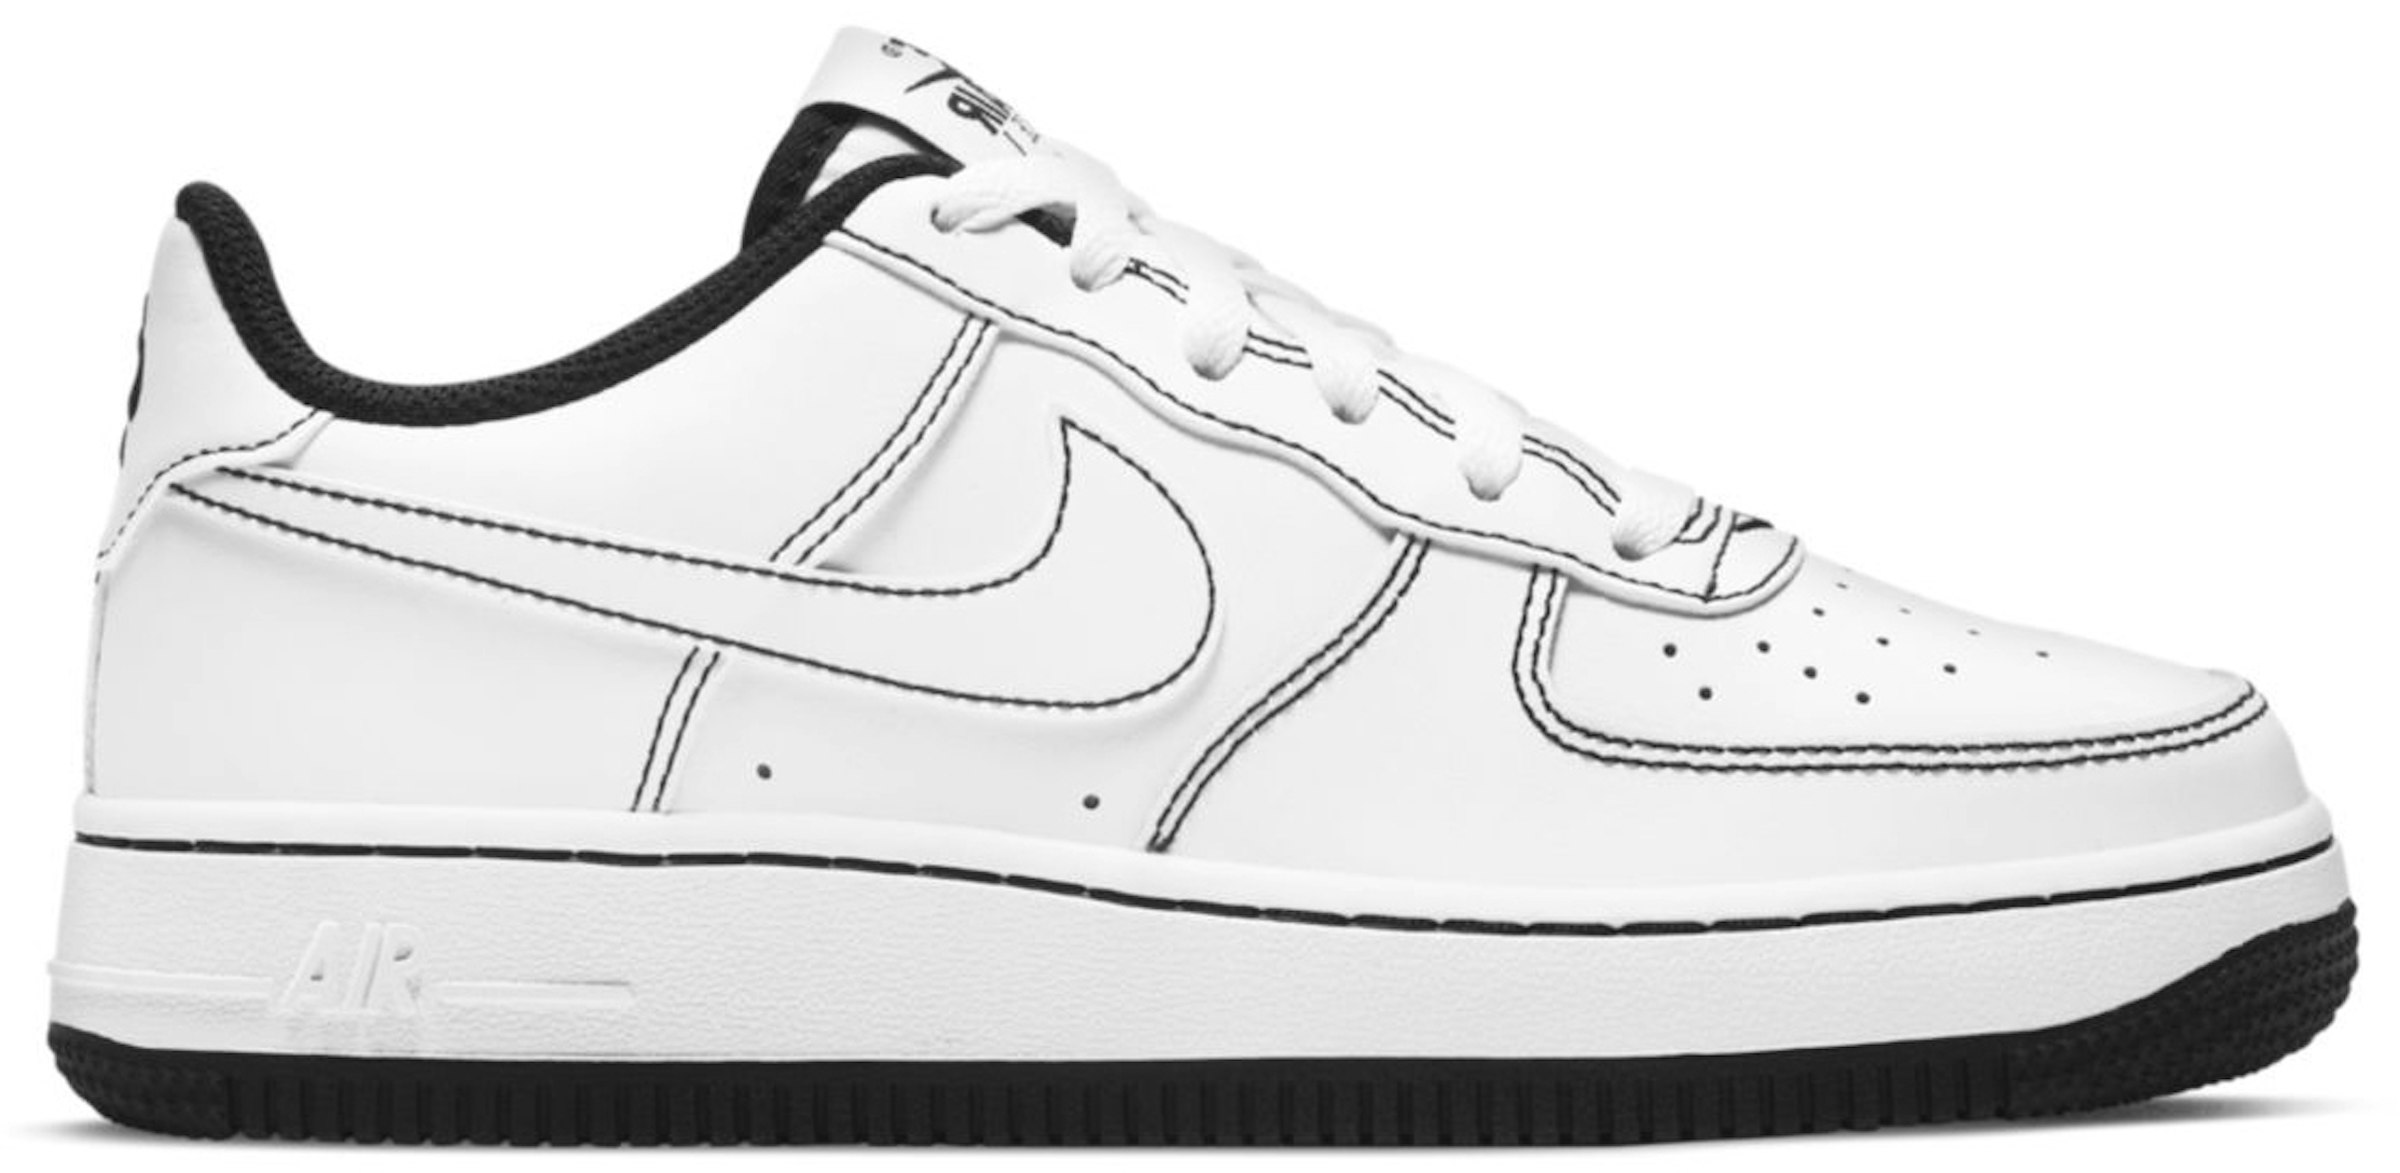 Air Force 1 Low 07 Contrast Stitch White Black (GS) Kids' - CW1575-104 - US